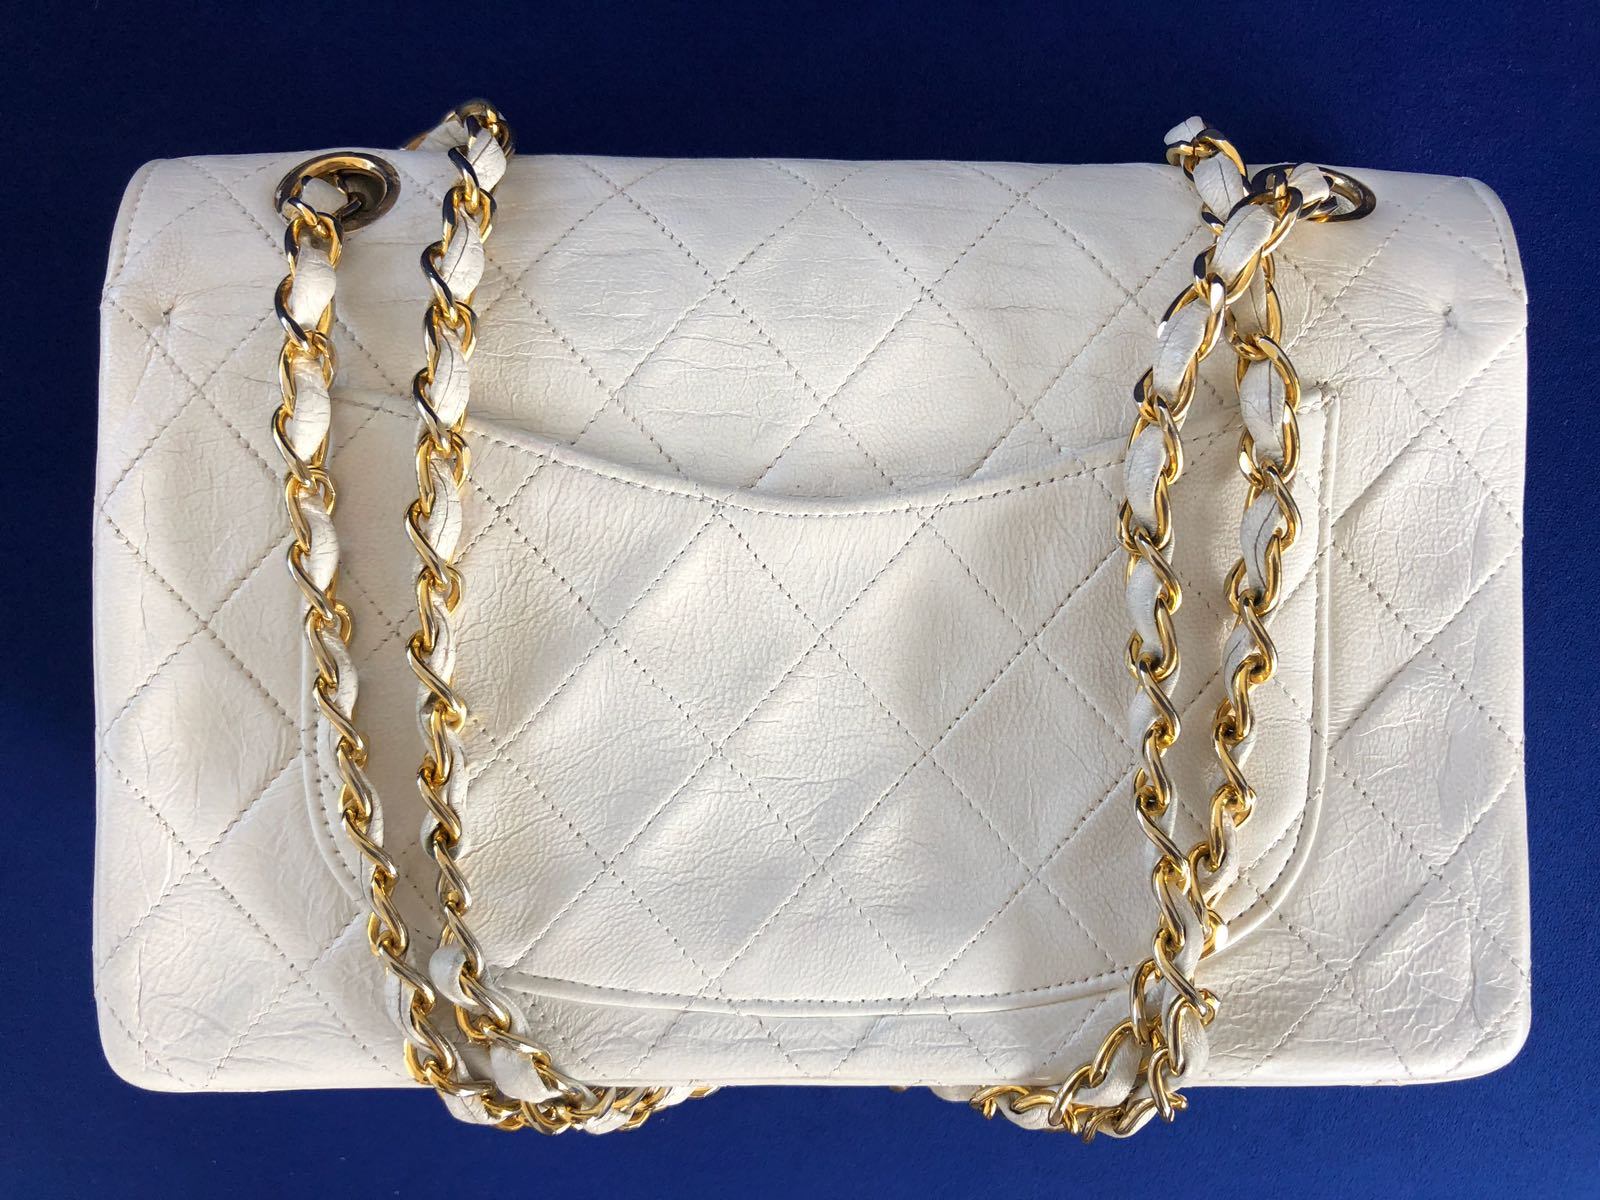 Timeless/classique leather clutch bag Chanel White in Leather - 26169870